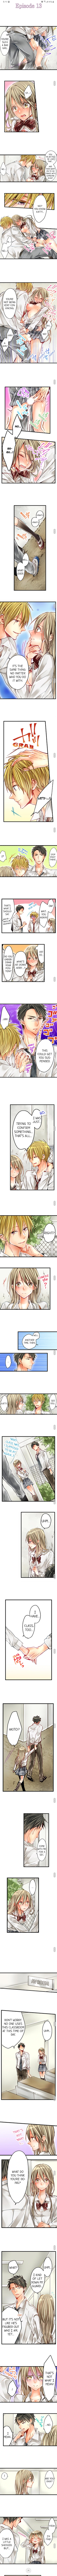 25-Year-Old High School Girl, I Wouldn’t Do This with a Kid Ch.13